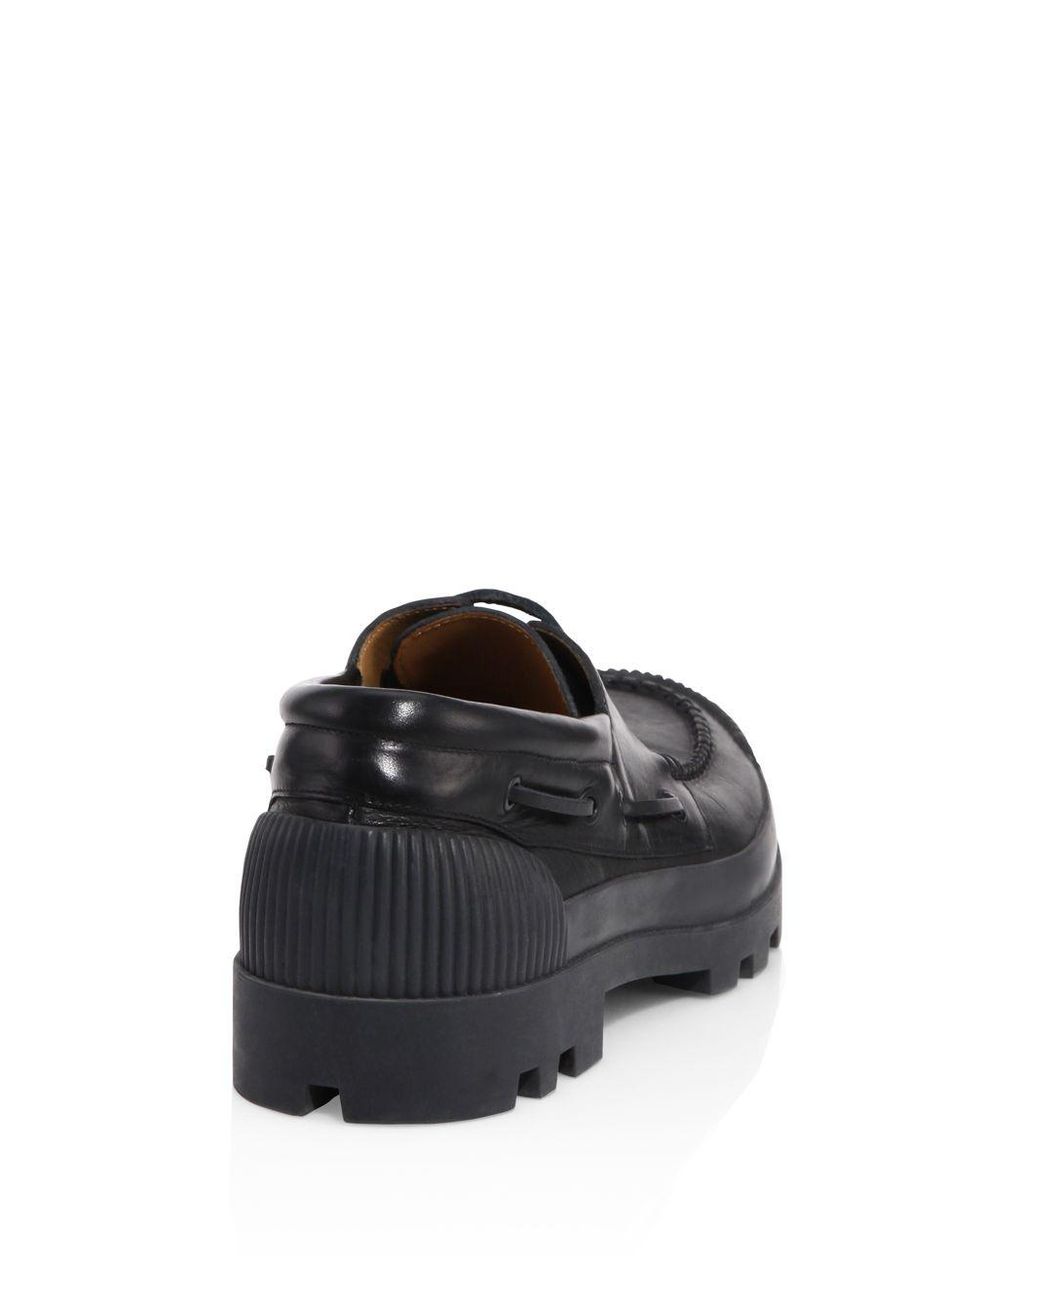 Acne Studios Leather Trevor Lace-up Boat Shoes in Black for Men | Lyst